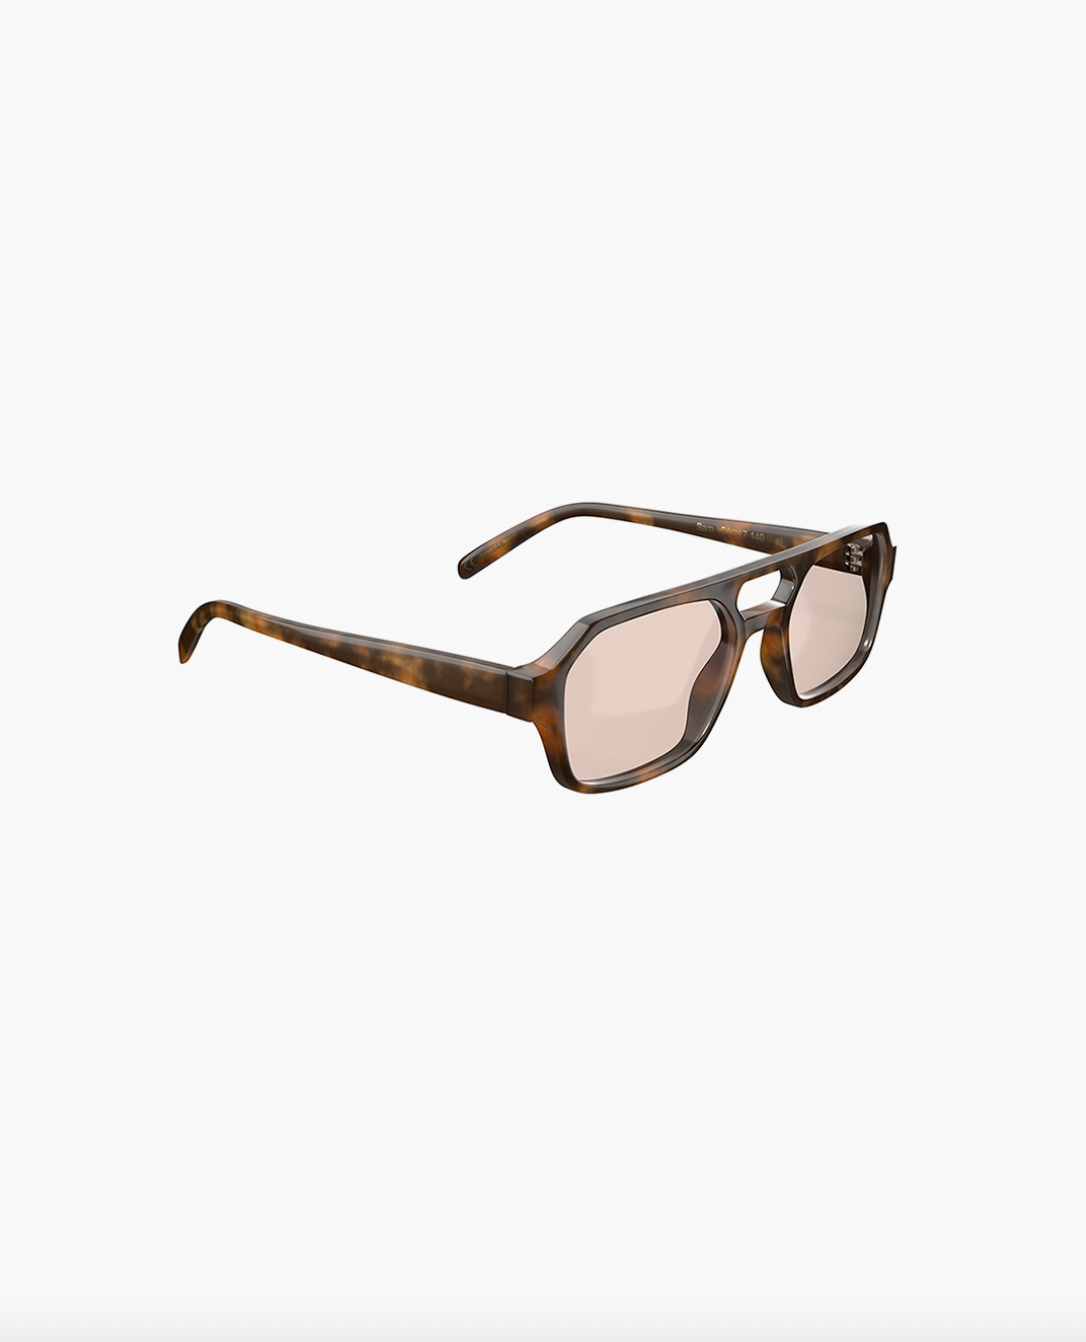 Get ready to turn heads with our Sam Tortoise Cinnamon sunglasses by Corlin Eyewear. These sunglasses feature UV protection 400 and scratch-resistant CR39 lenses, perfect for any outdoor activity.